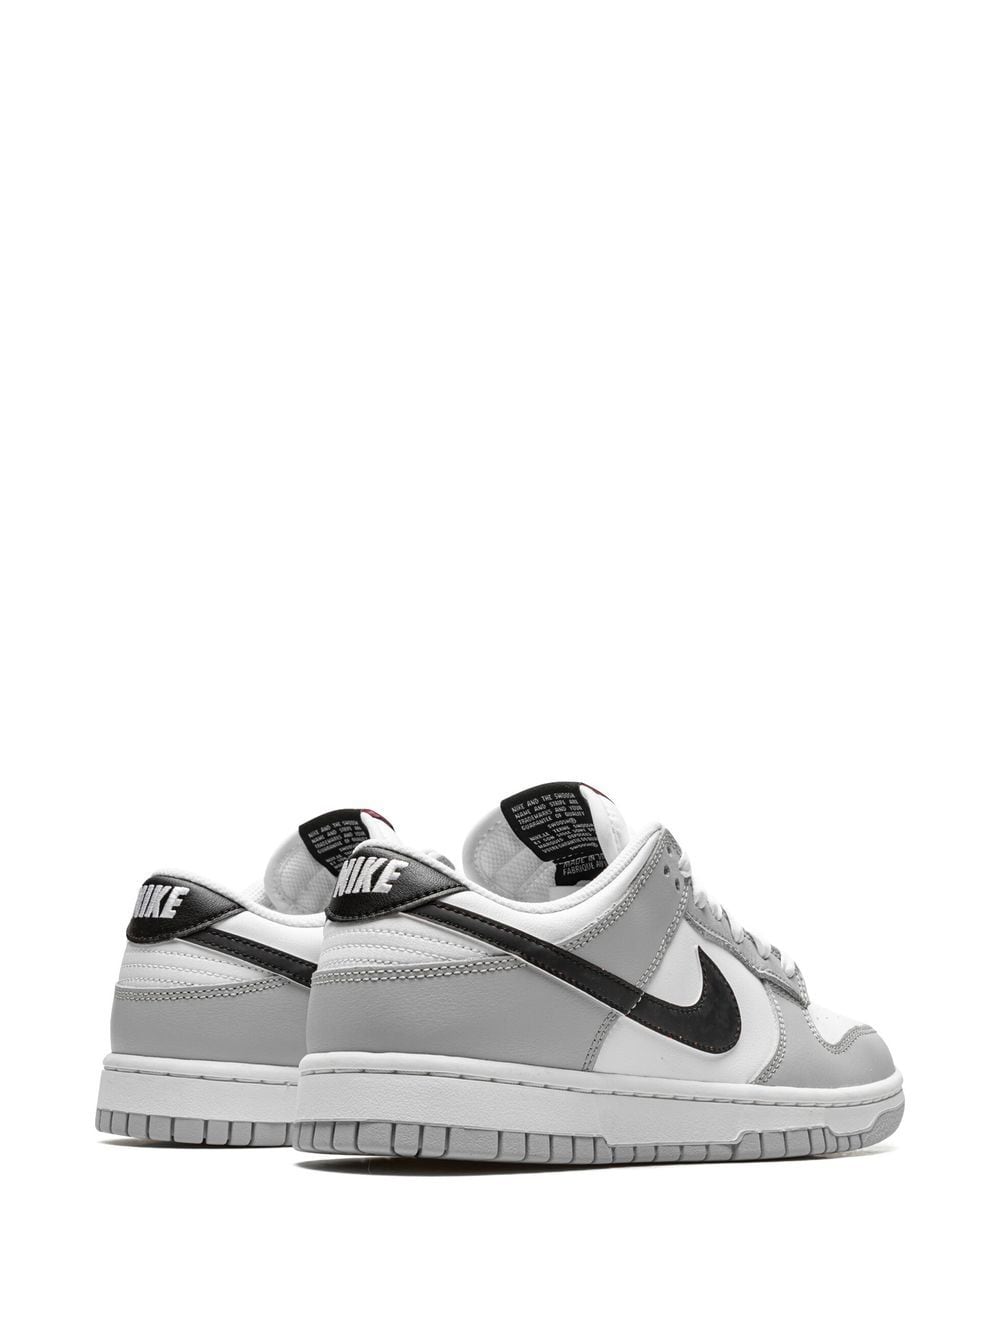 Nike DUNK Lottery Pack Grey